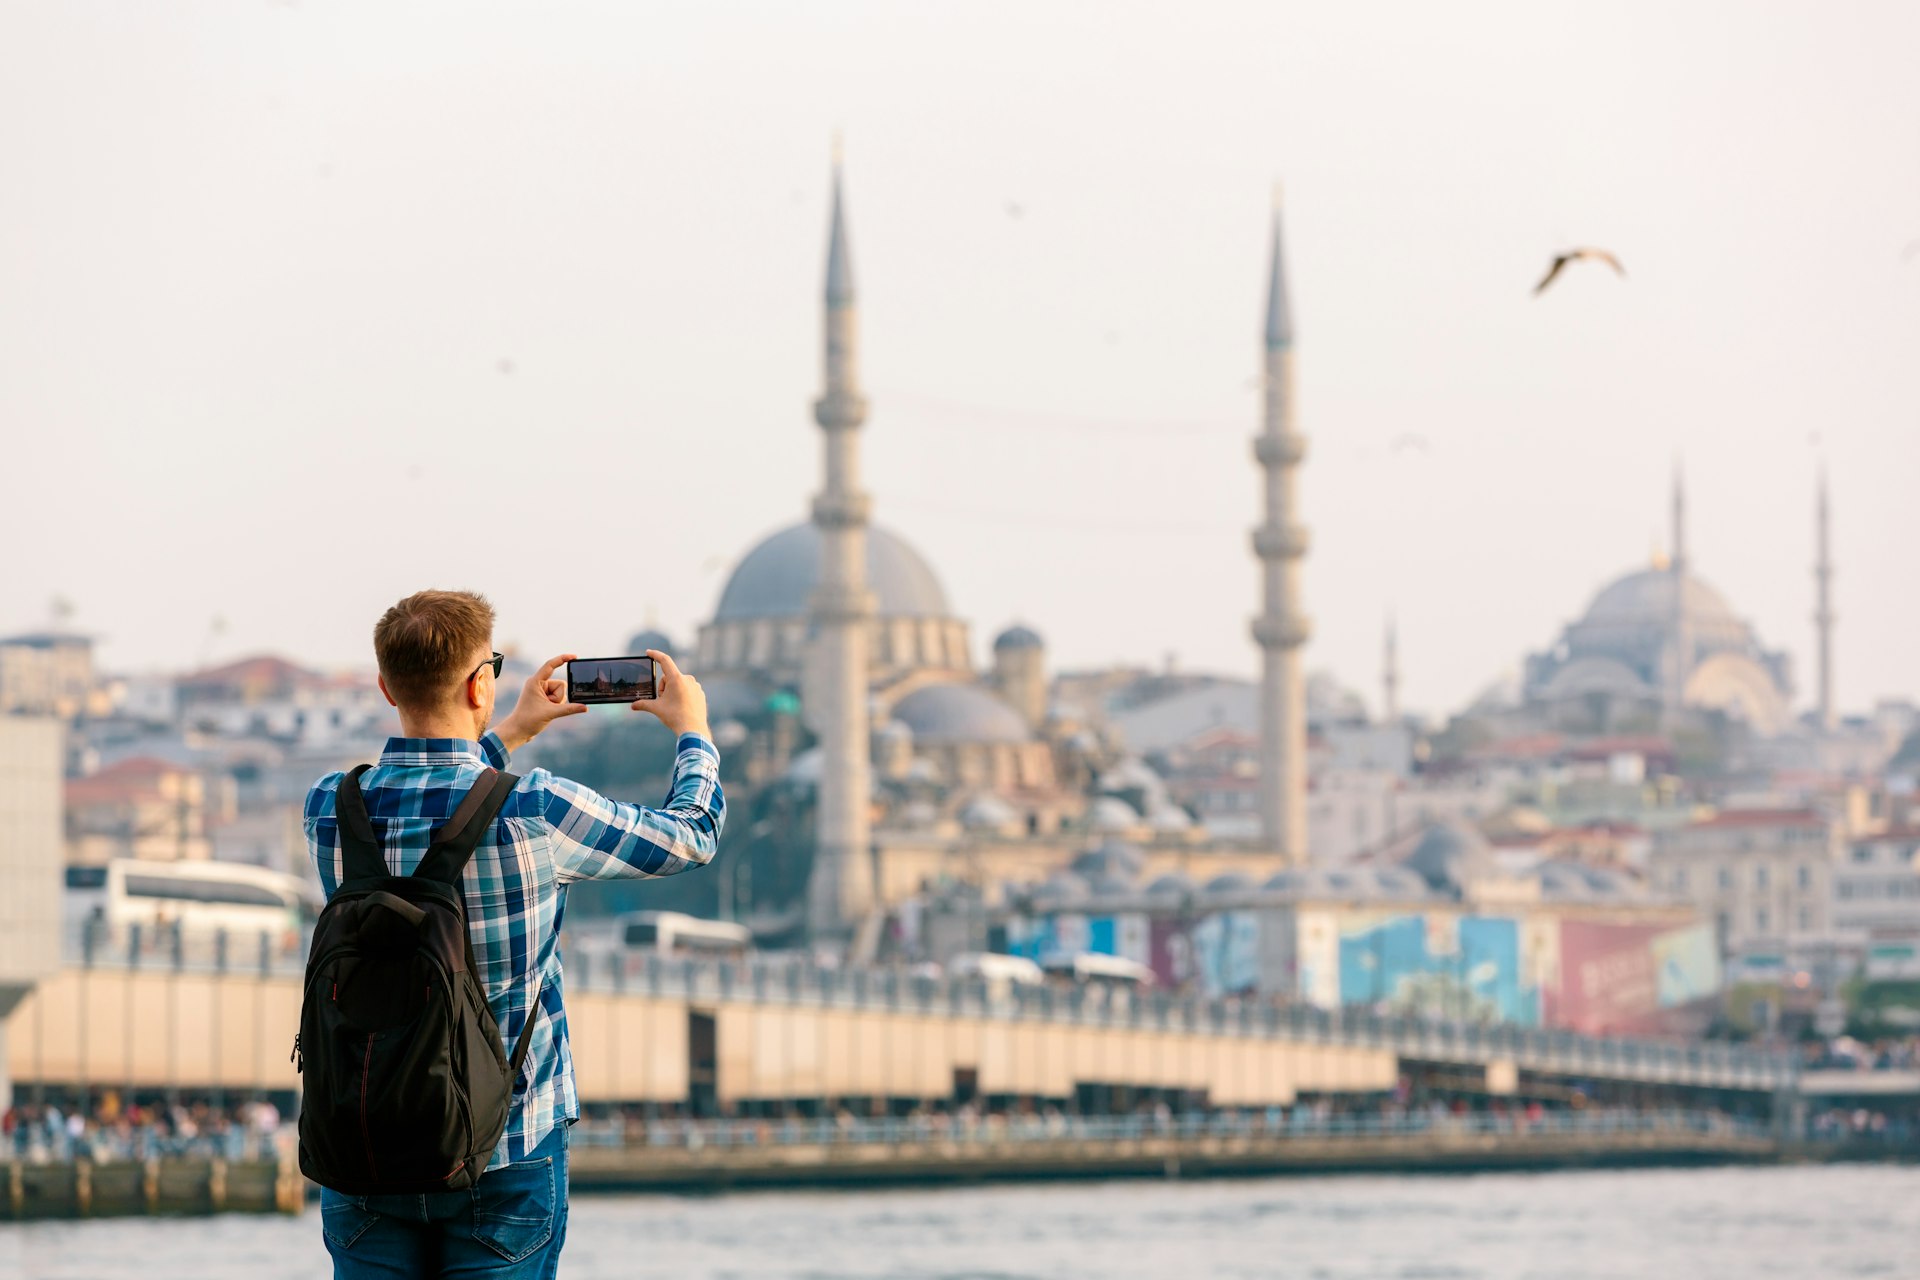 Man takes a photo of the Hagia Sophia from a viewpoint